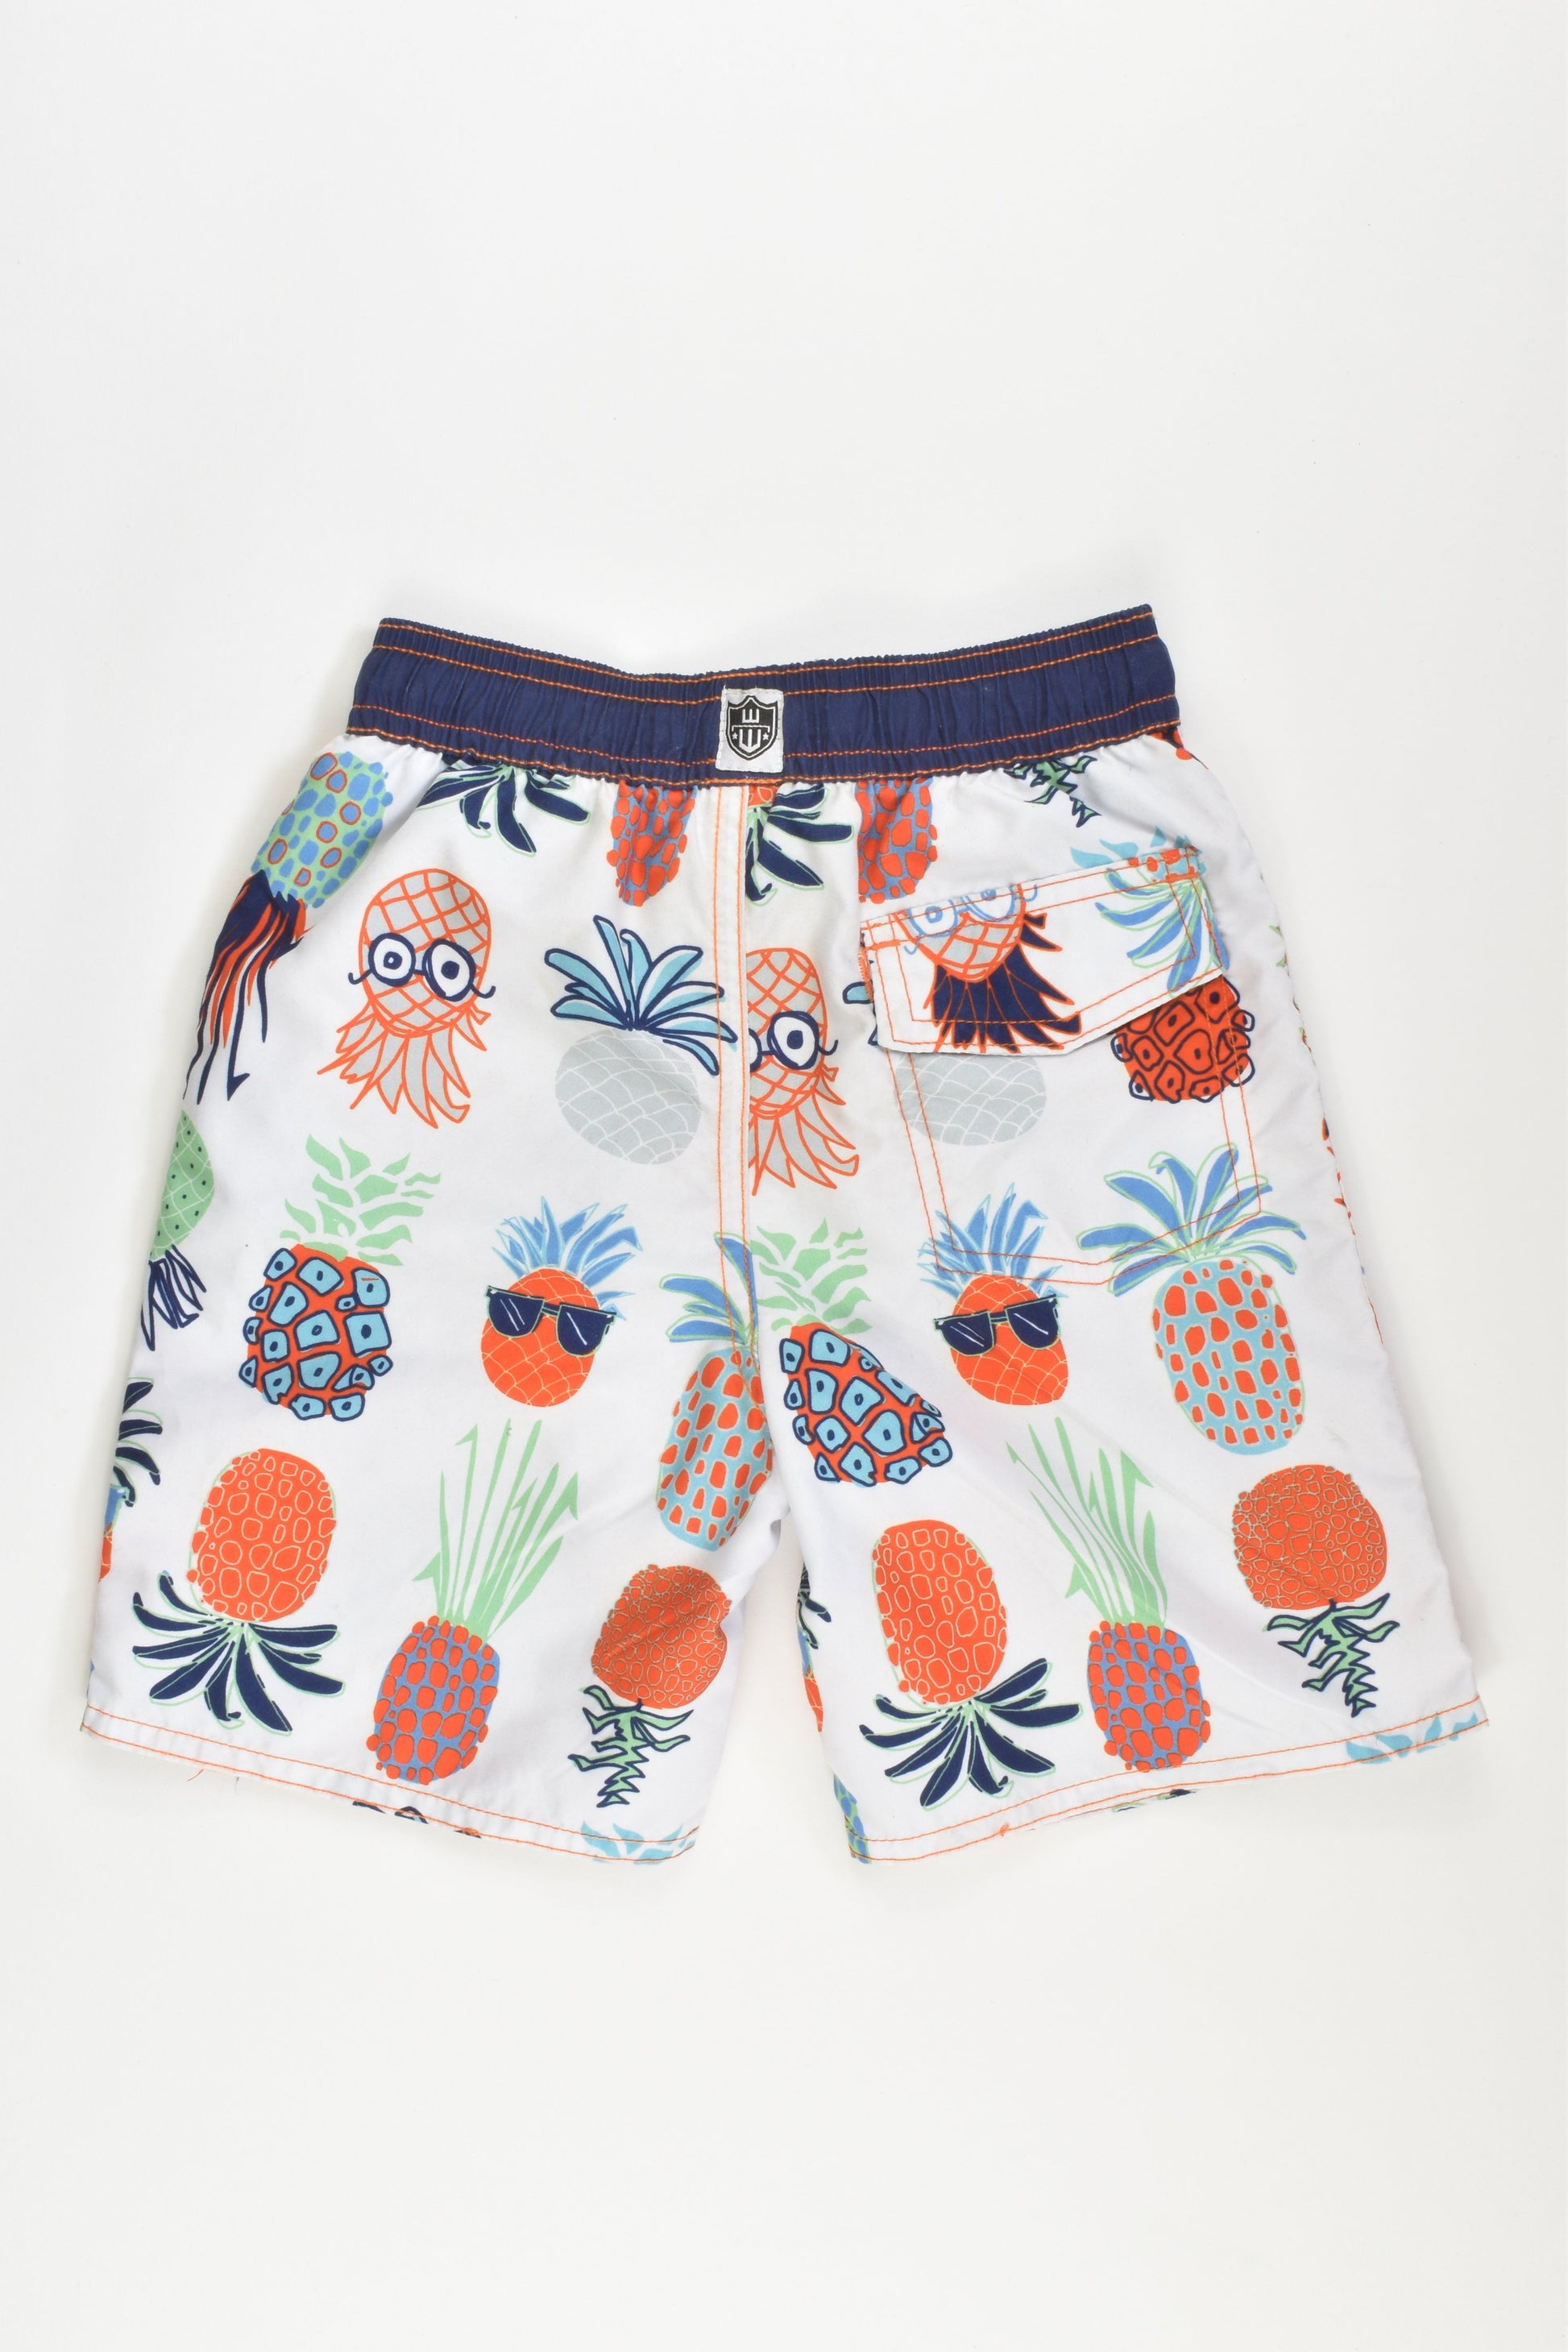 Wes and Willy Size 2 Boardshorts